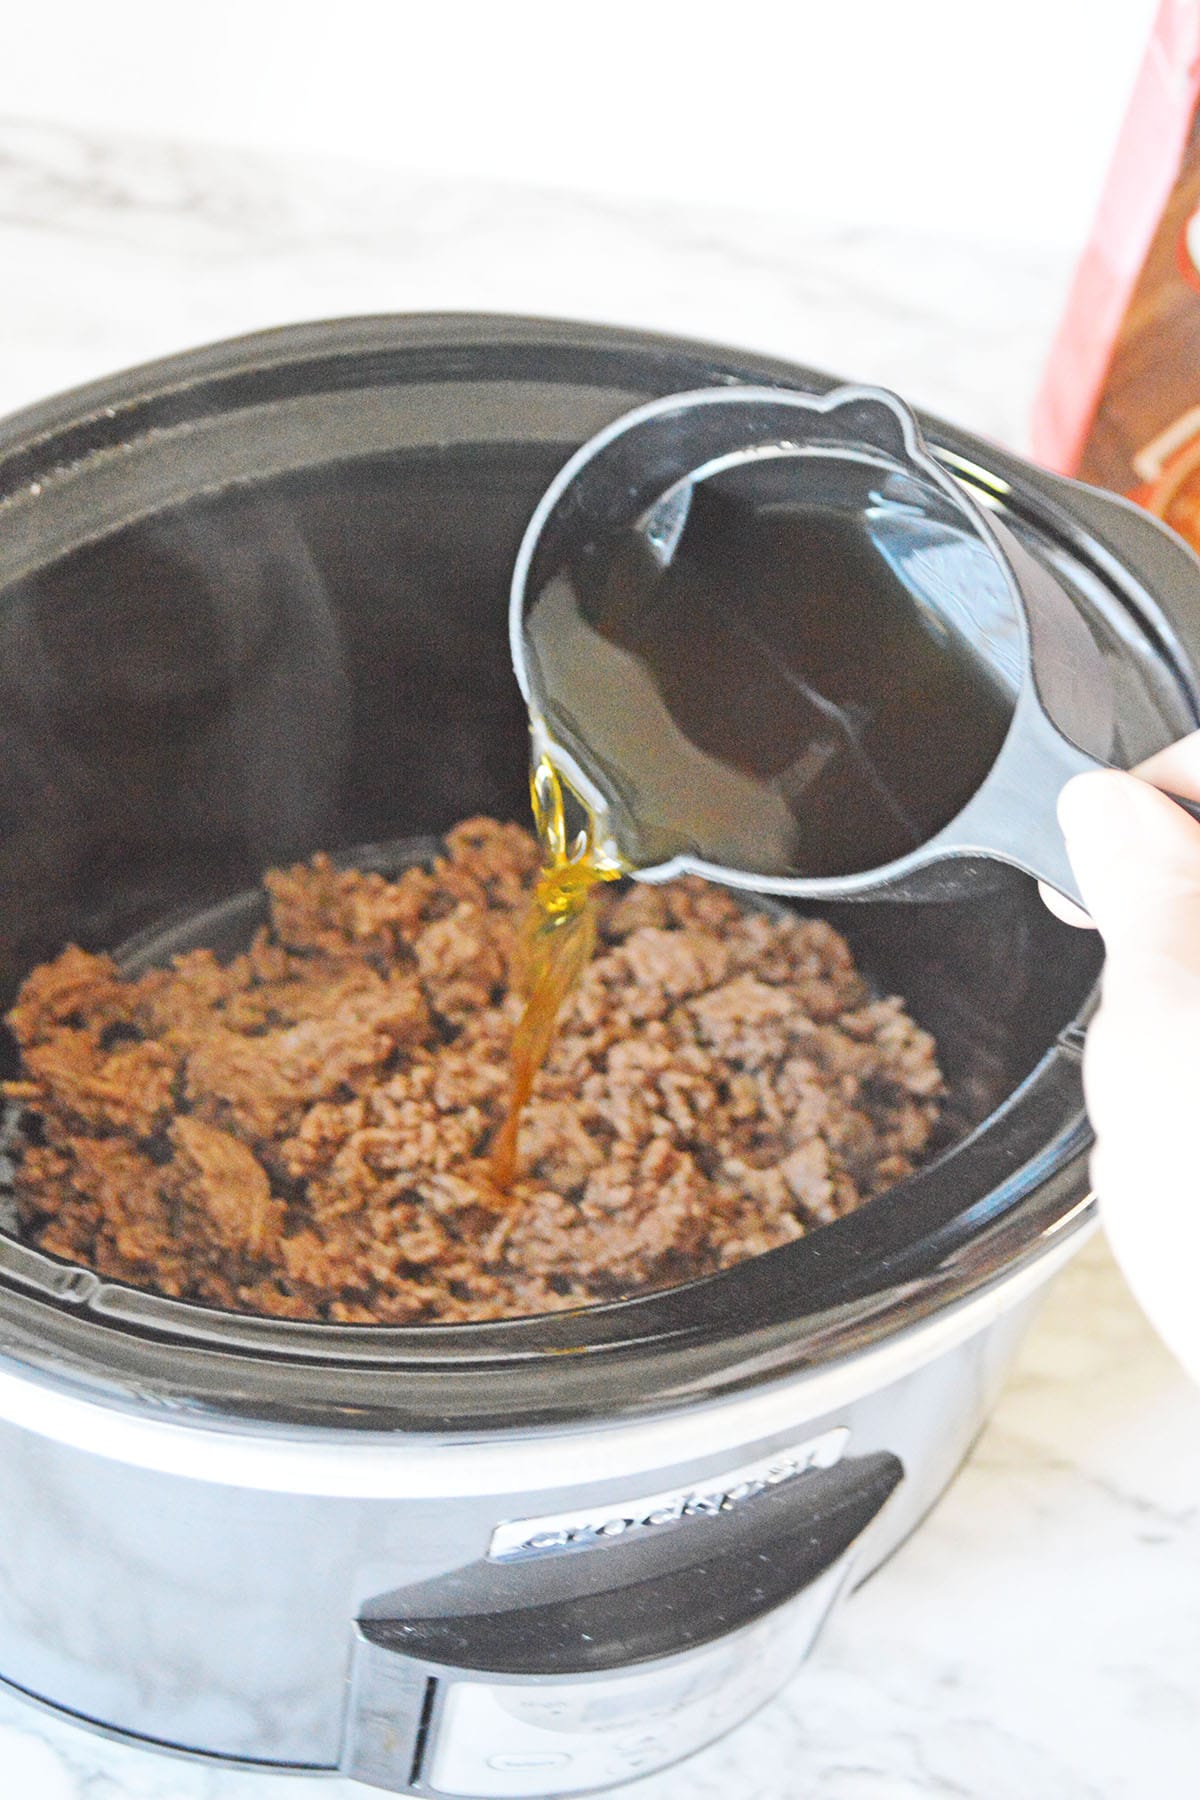 Crockpot with ground beef and broth